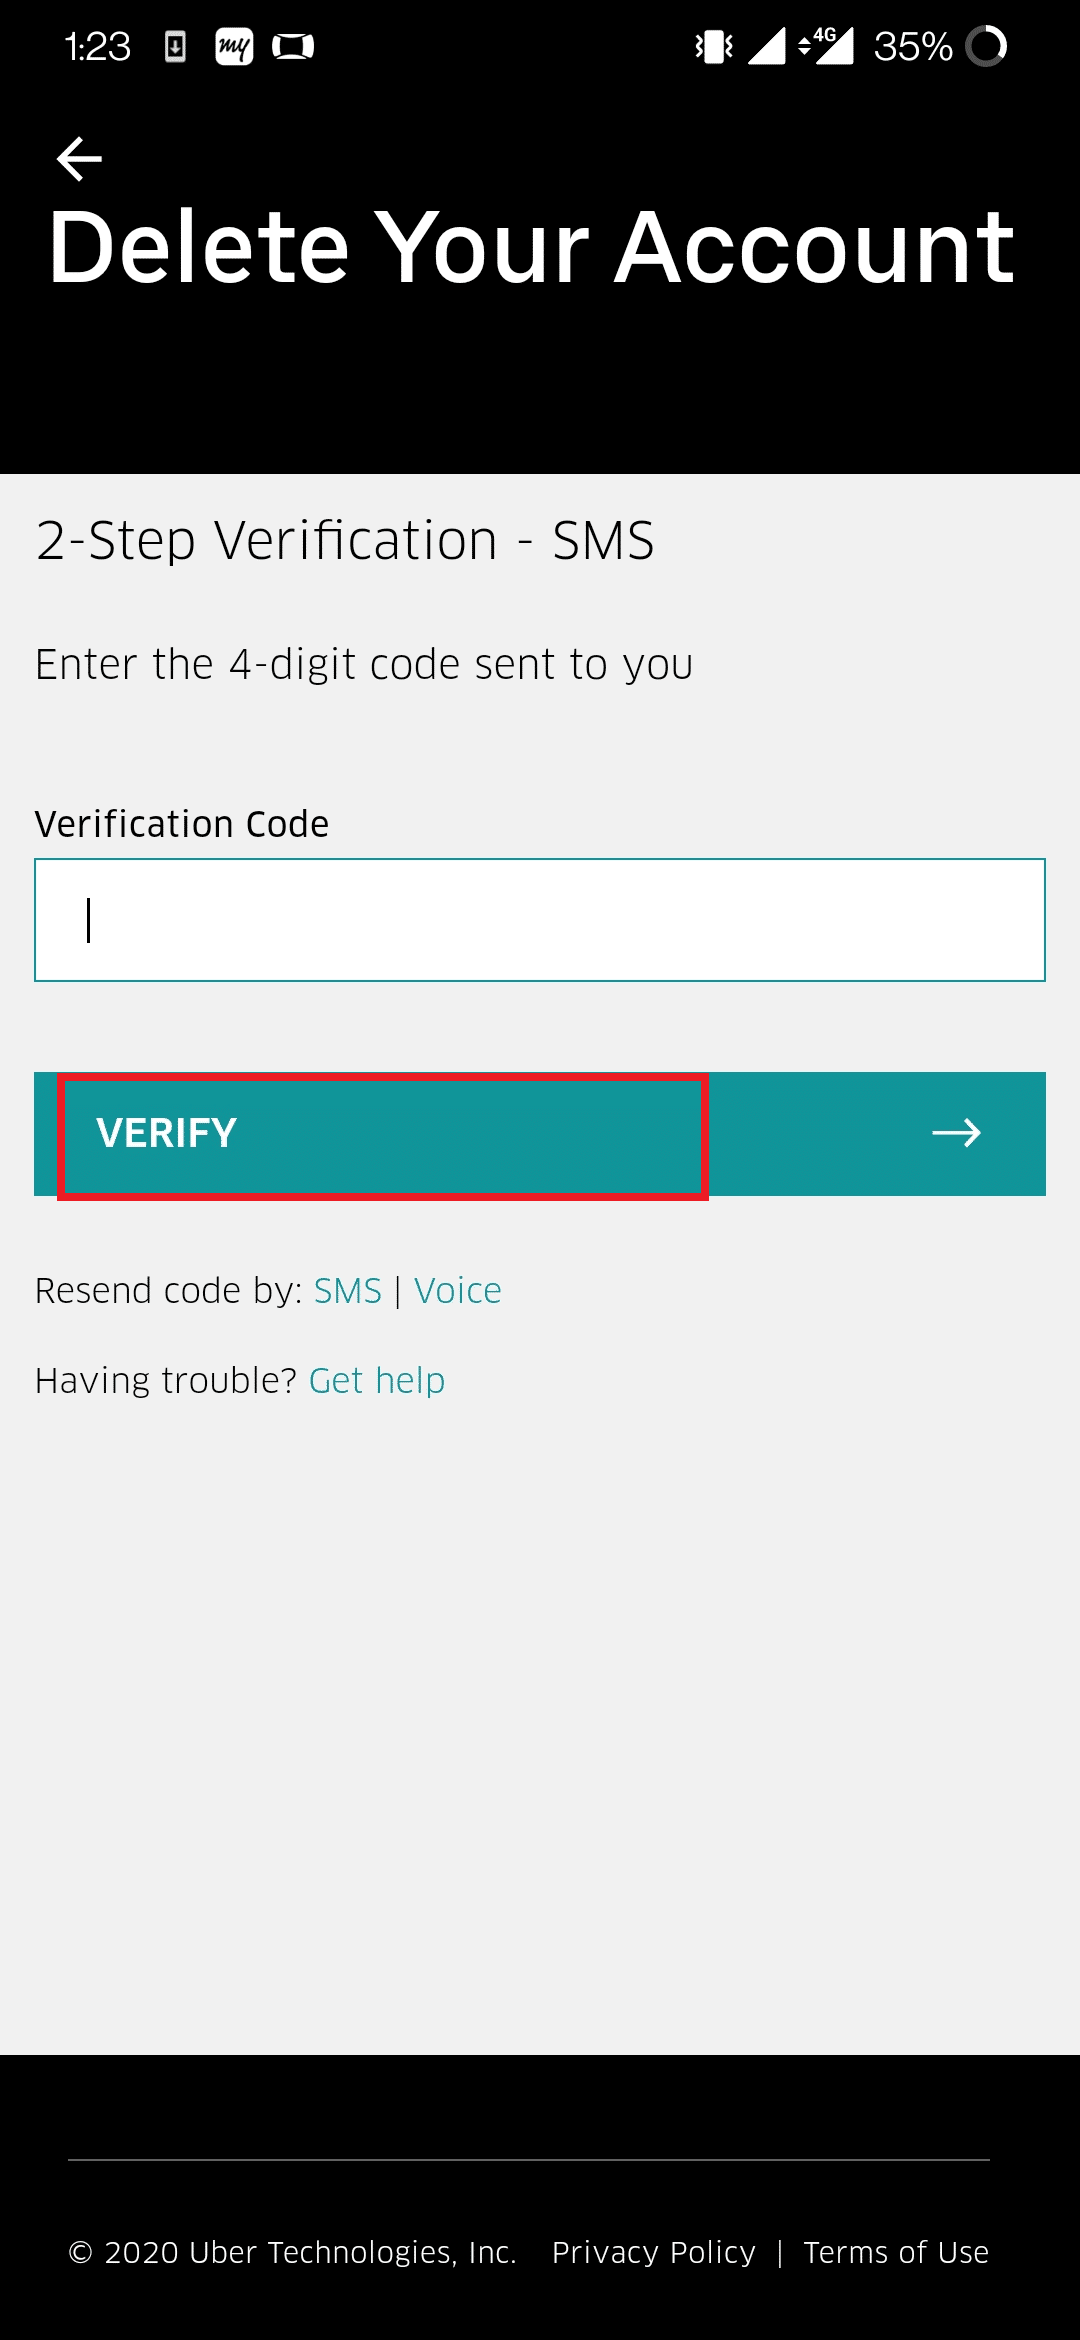 Enter the verification code and tap Verify